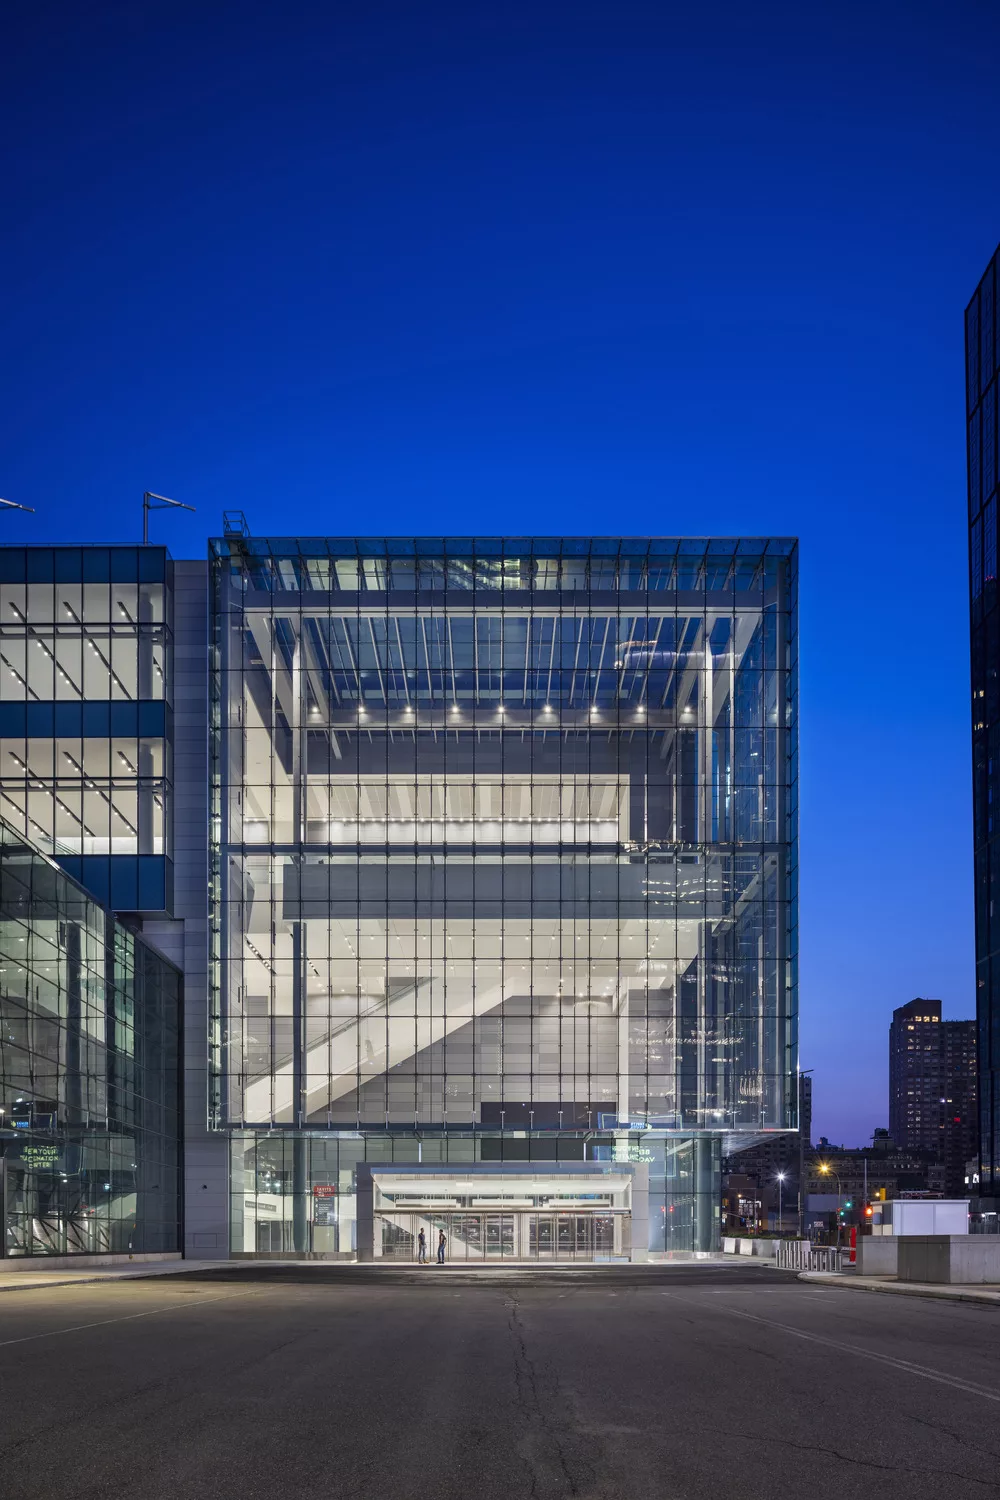 Exterior twilight view of the Javits Convention Center Expansion's soaring, glass-and-steel lobby illuminated within to reveal escalators and exhibit space